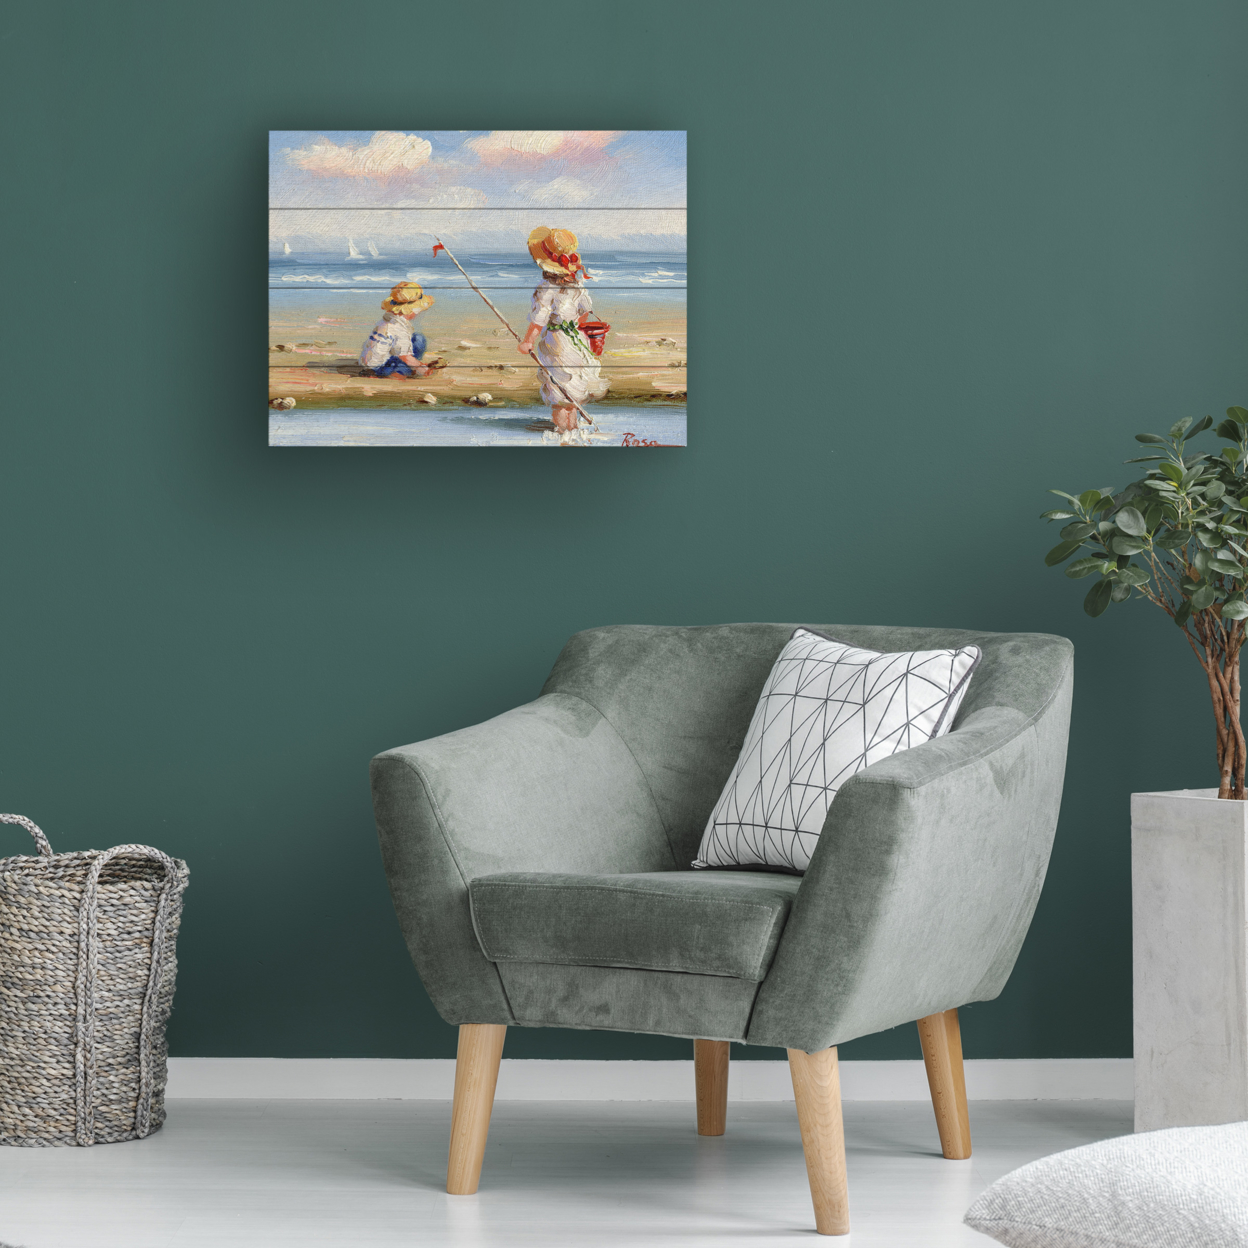 Wall Art 12 X 16 Inches Titled At The Beach III Ready To Hang Printed On Wooden Planks